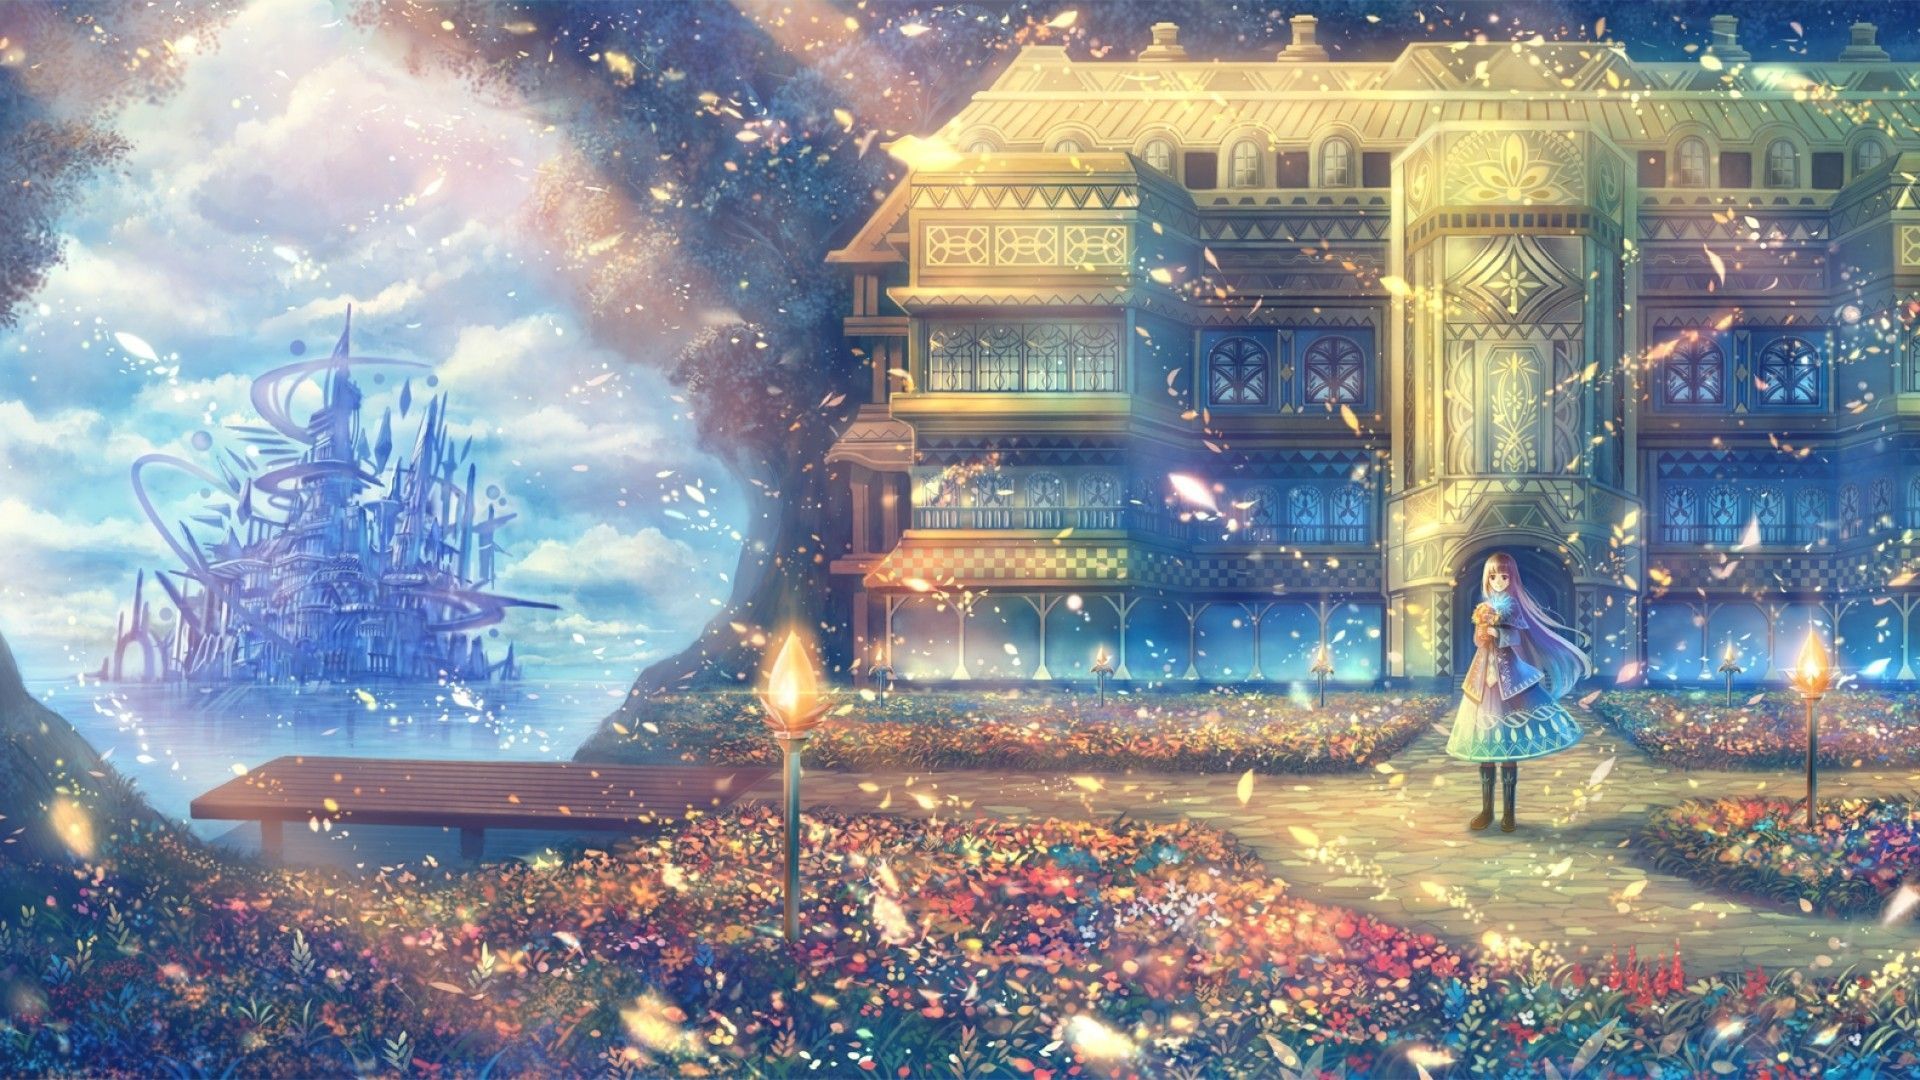 Download Serene Fantasy Anime Landscape with Cherry Blossoms and Moonlit  Castle | Wallpapers.com